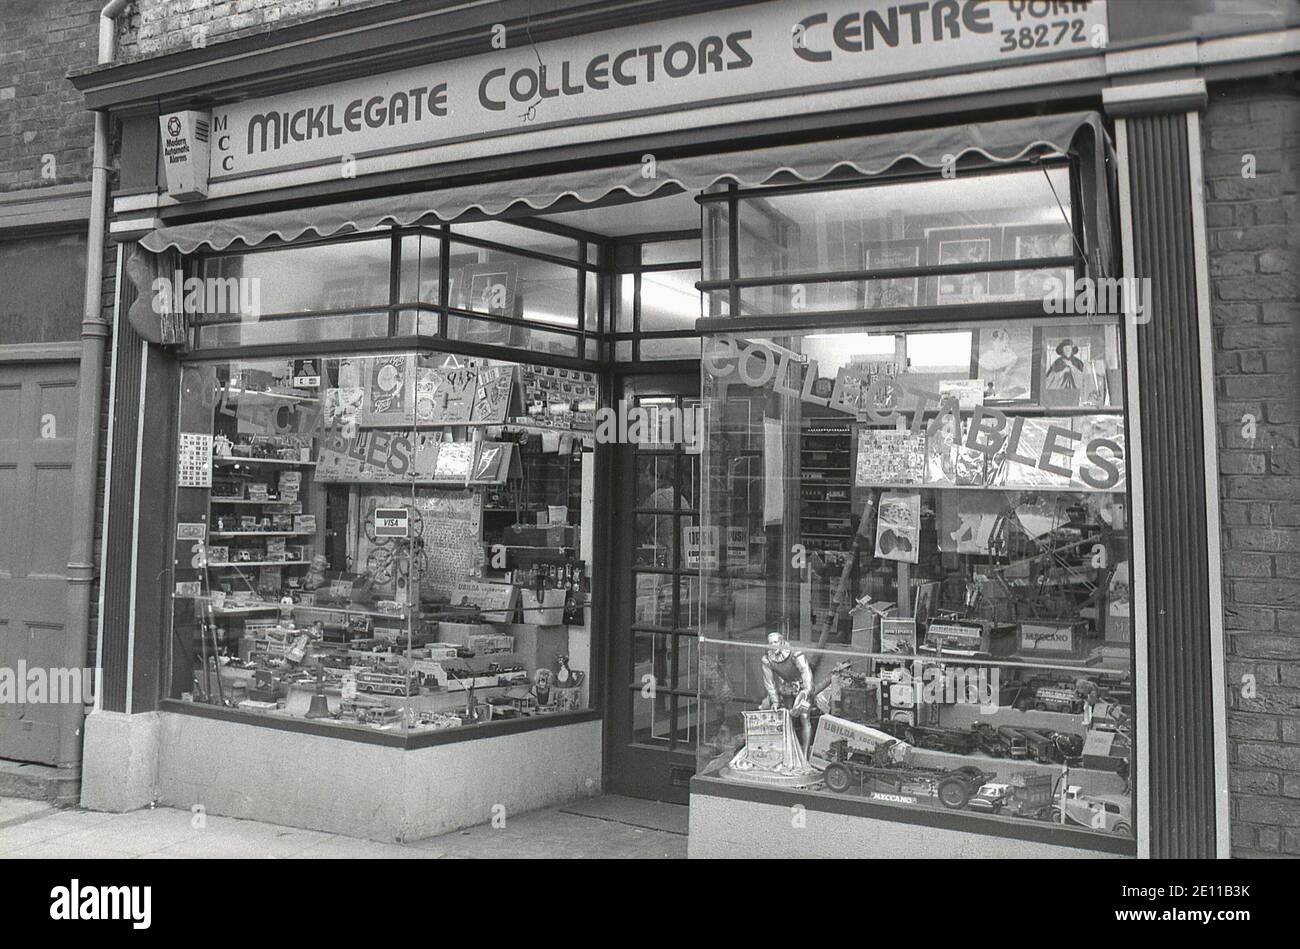 1980s, shop window of a high-street retail store, traditional in style with a central doorway, selling collectable items such as train sets, toy cars, figures and stamps, Micklegate Street, York, Egland, UK. Stock Photo